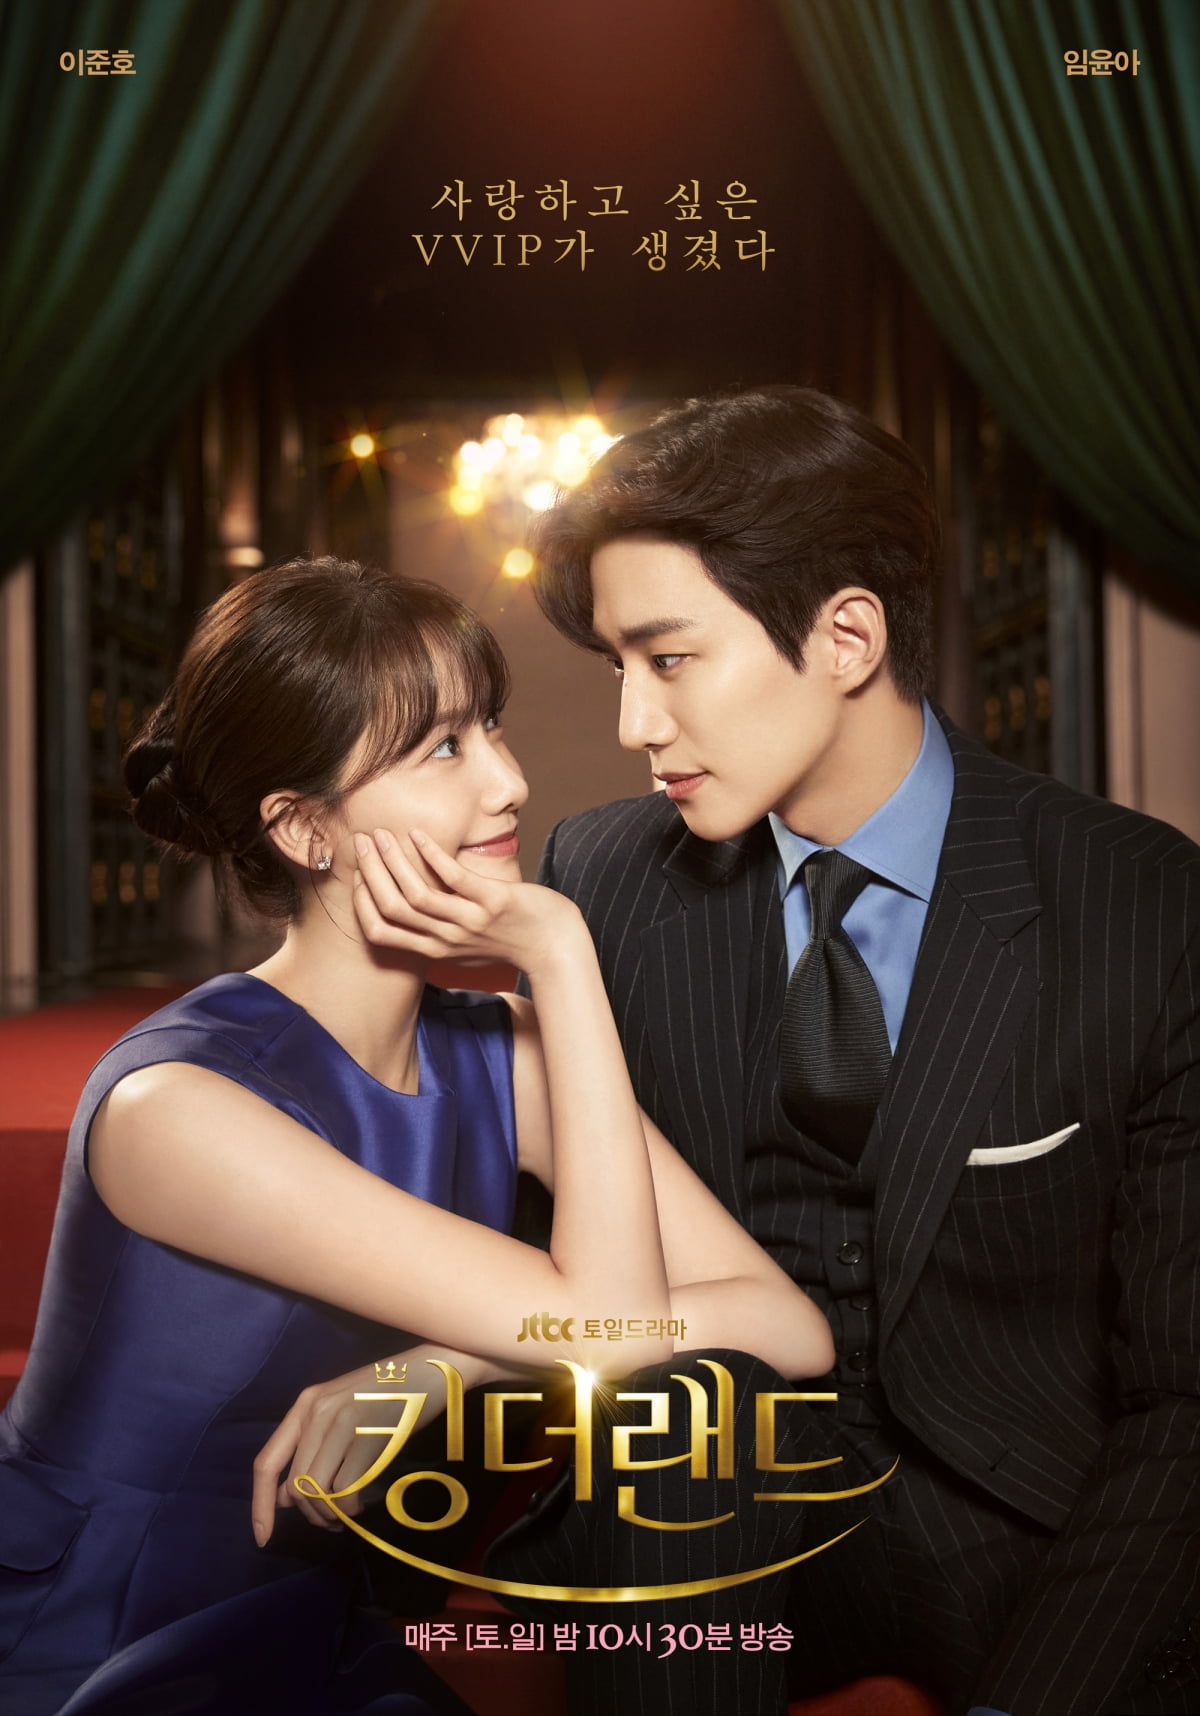 Lee Jun-ho ♥ Lim Yoon-ah's 'King the Land', Netflix TV ranked in the top 10 in 39 countries